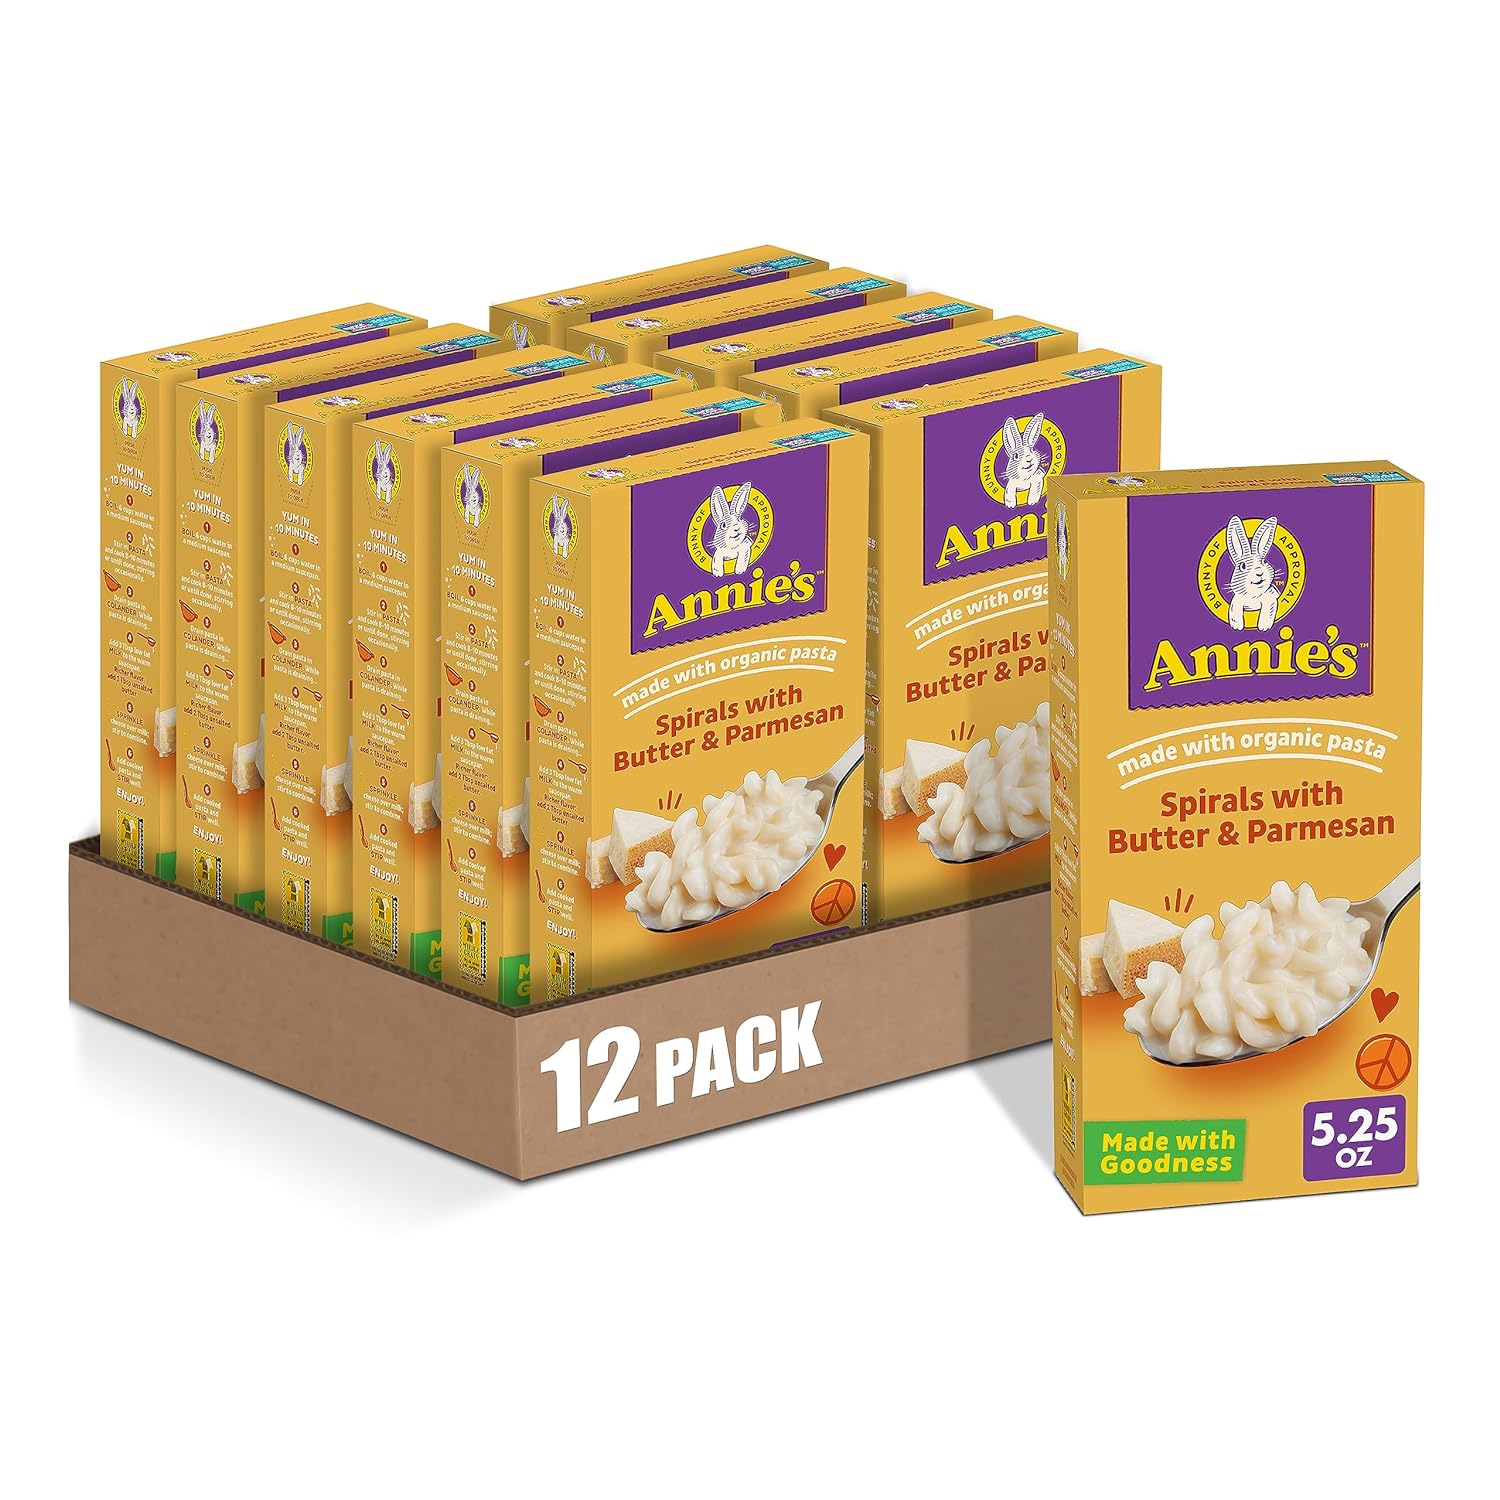 Annie’s Butter and Parmesan Spirals Macaroni & Cheese Dinner with Orga5.25 Ounces